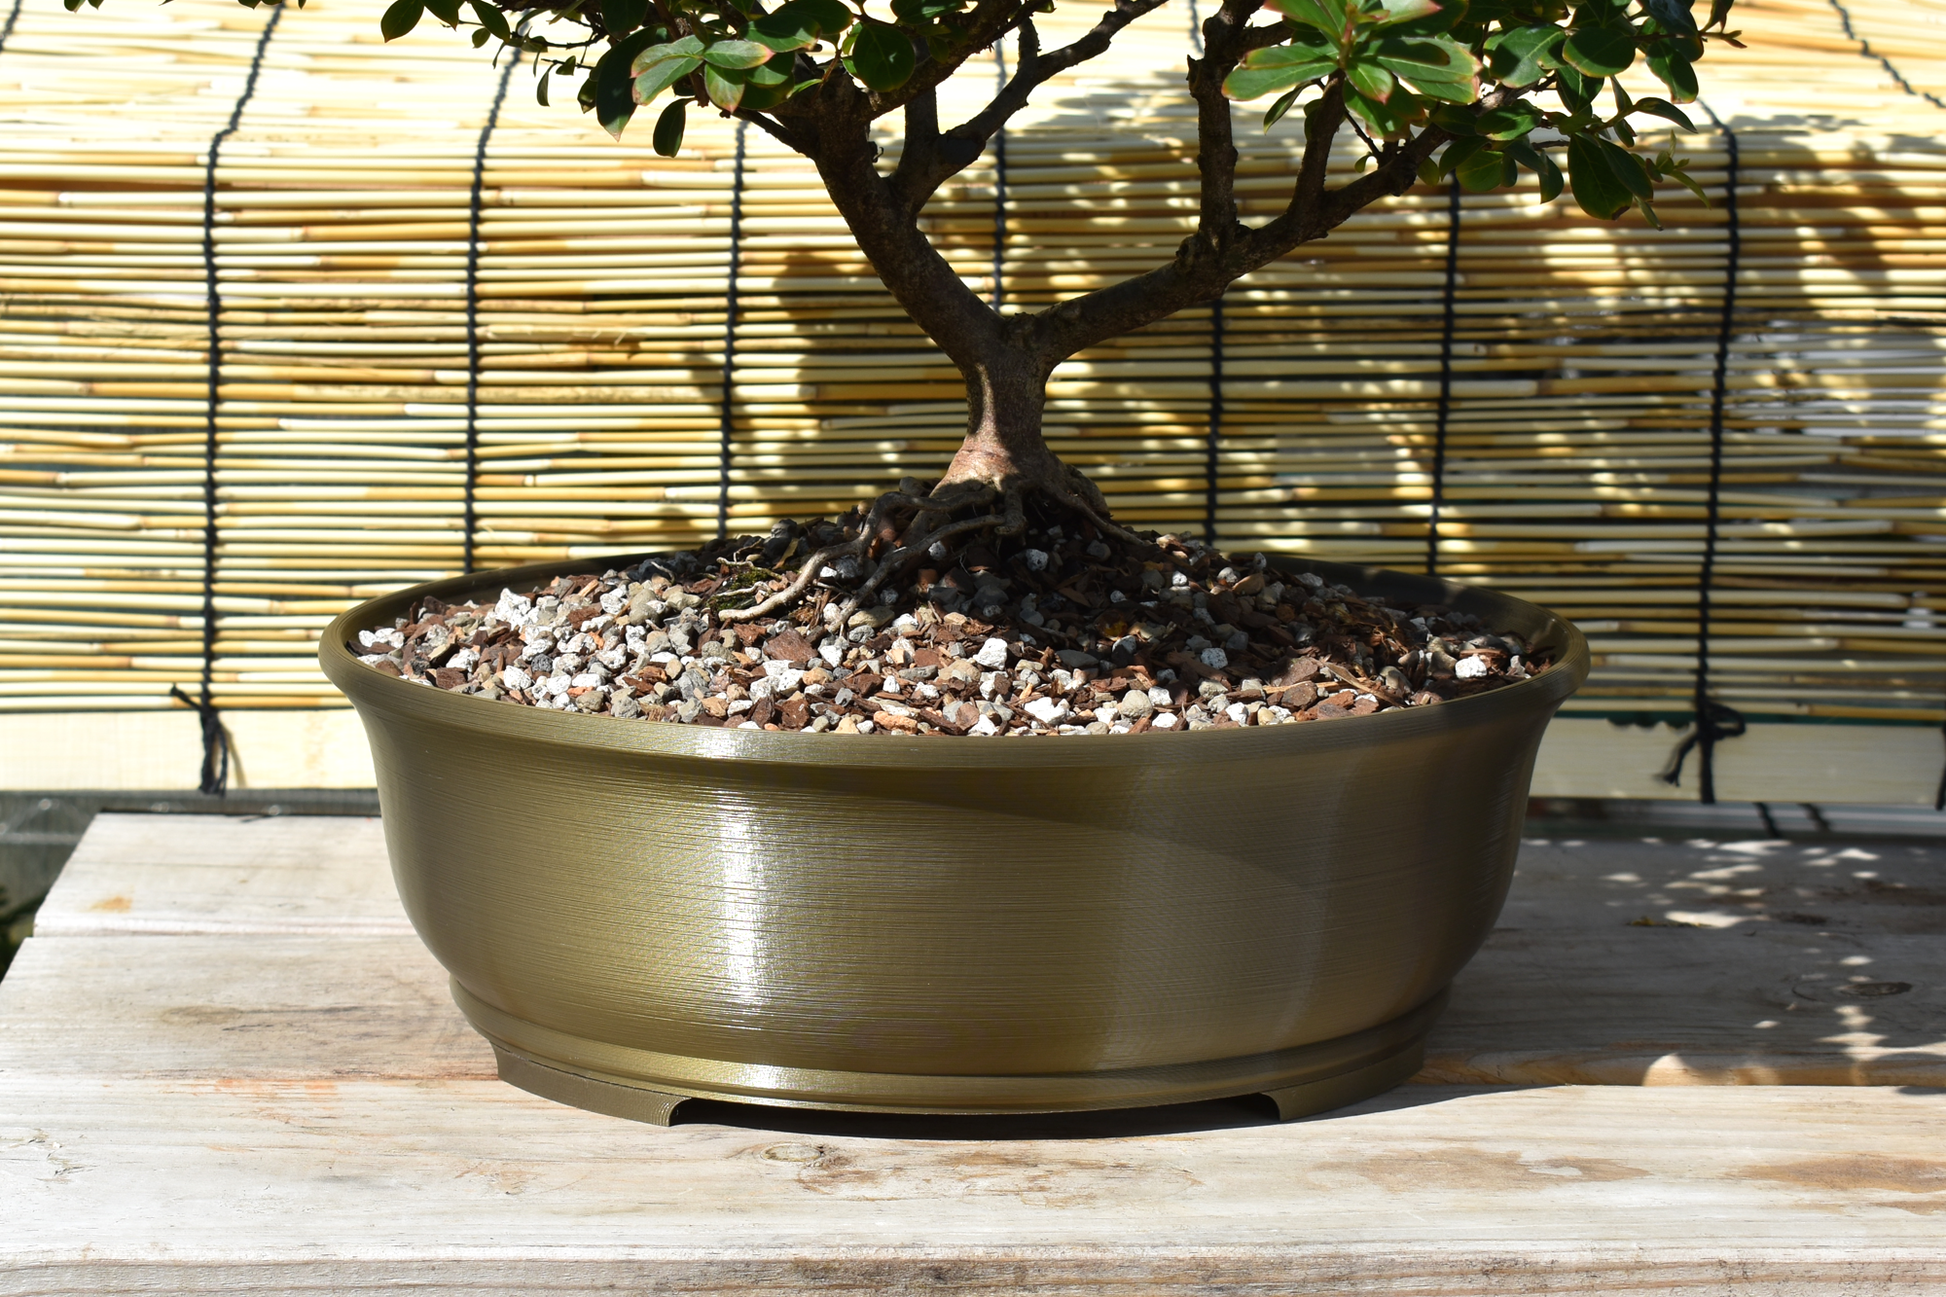 Flower pot oval for indoor and outdoor use